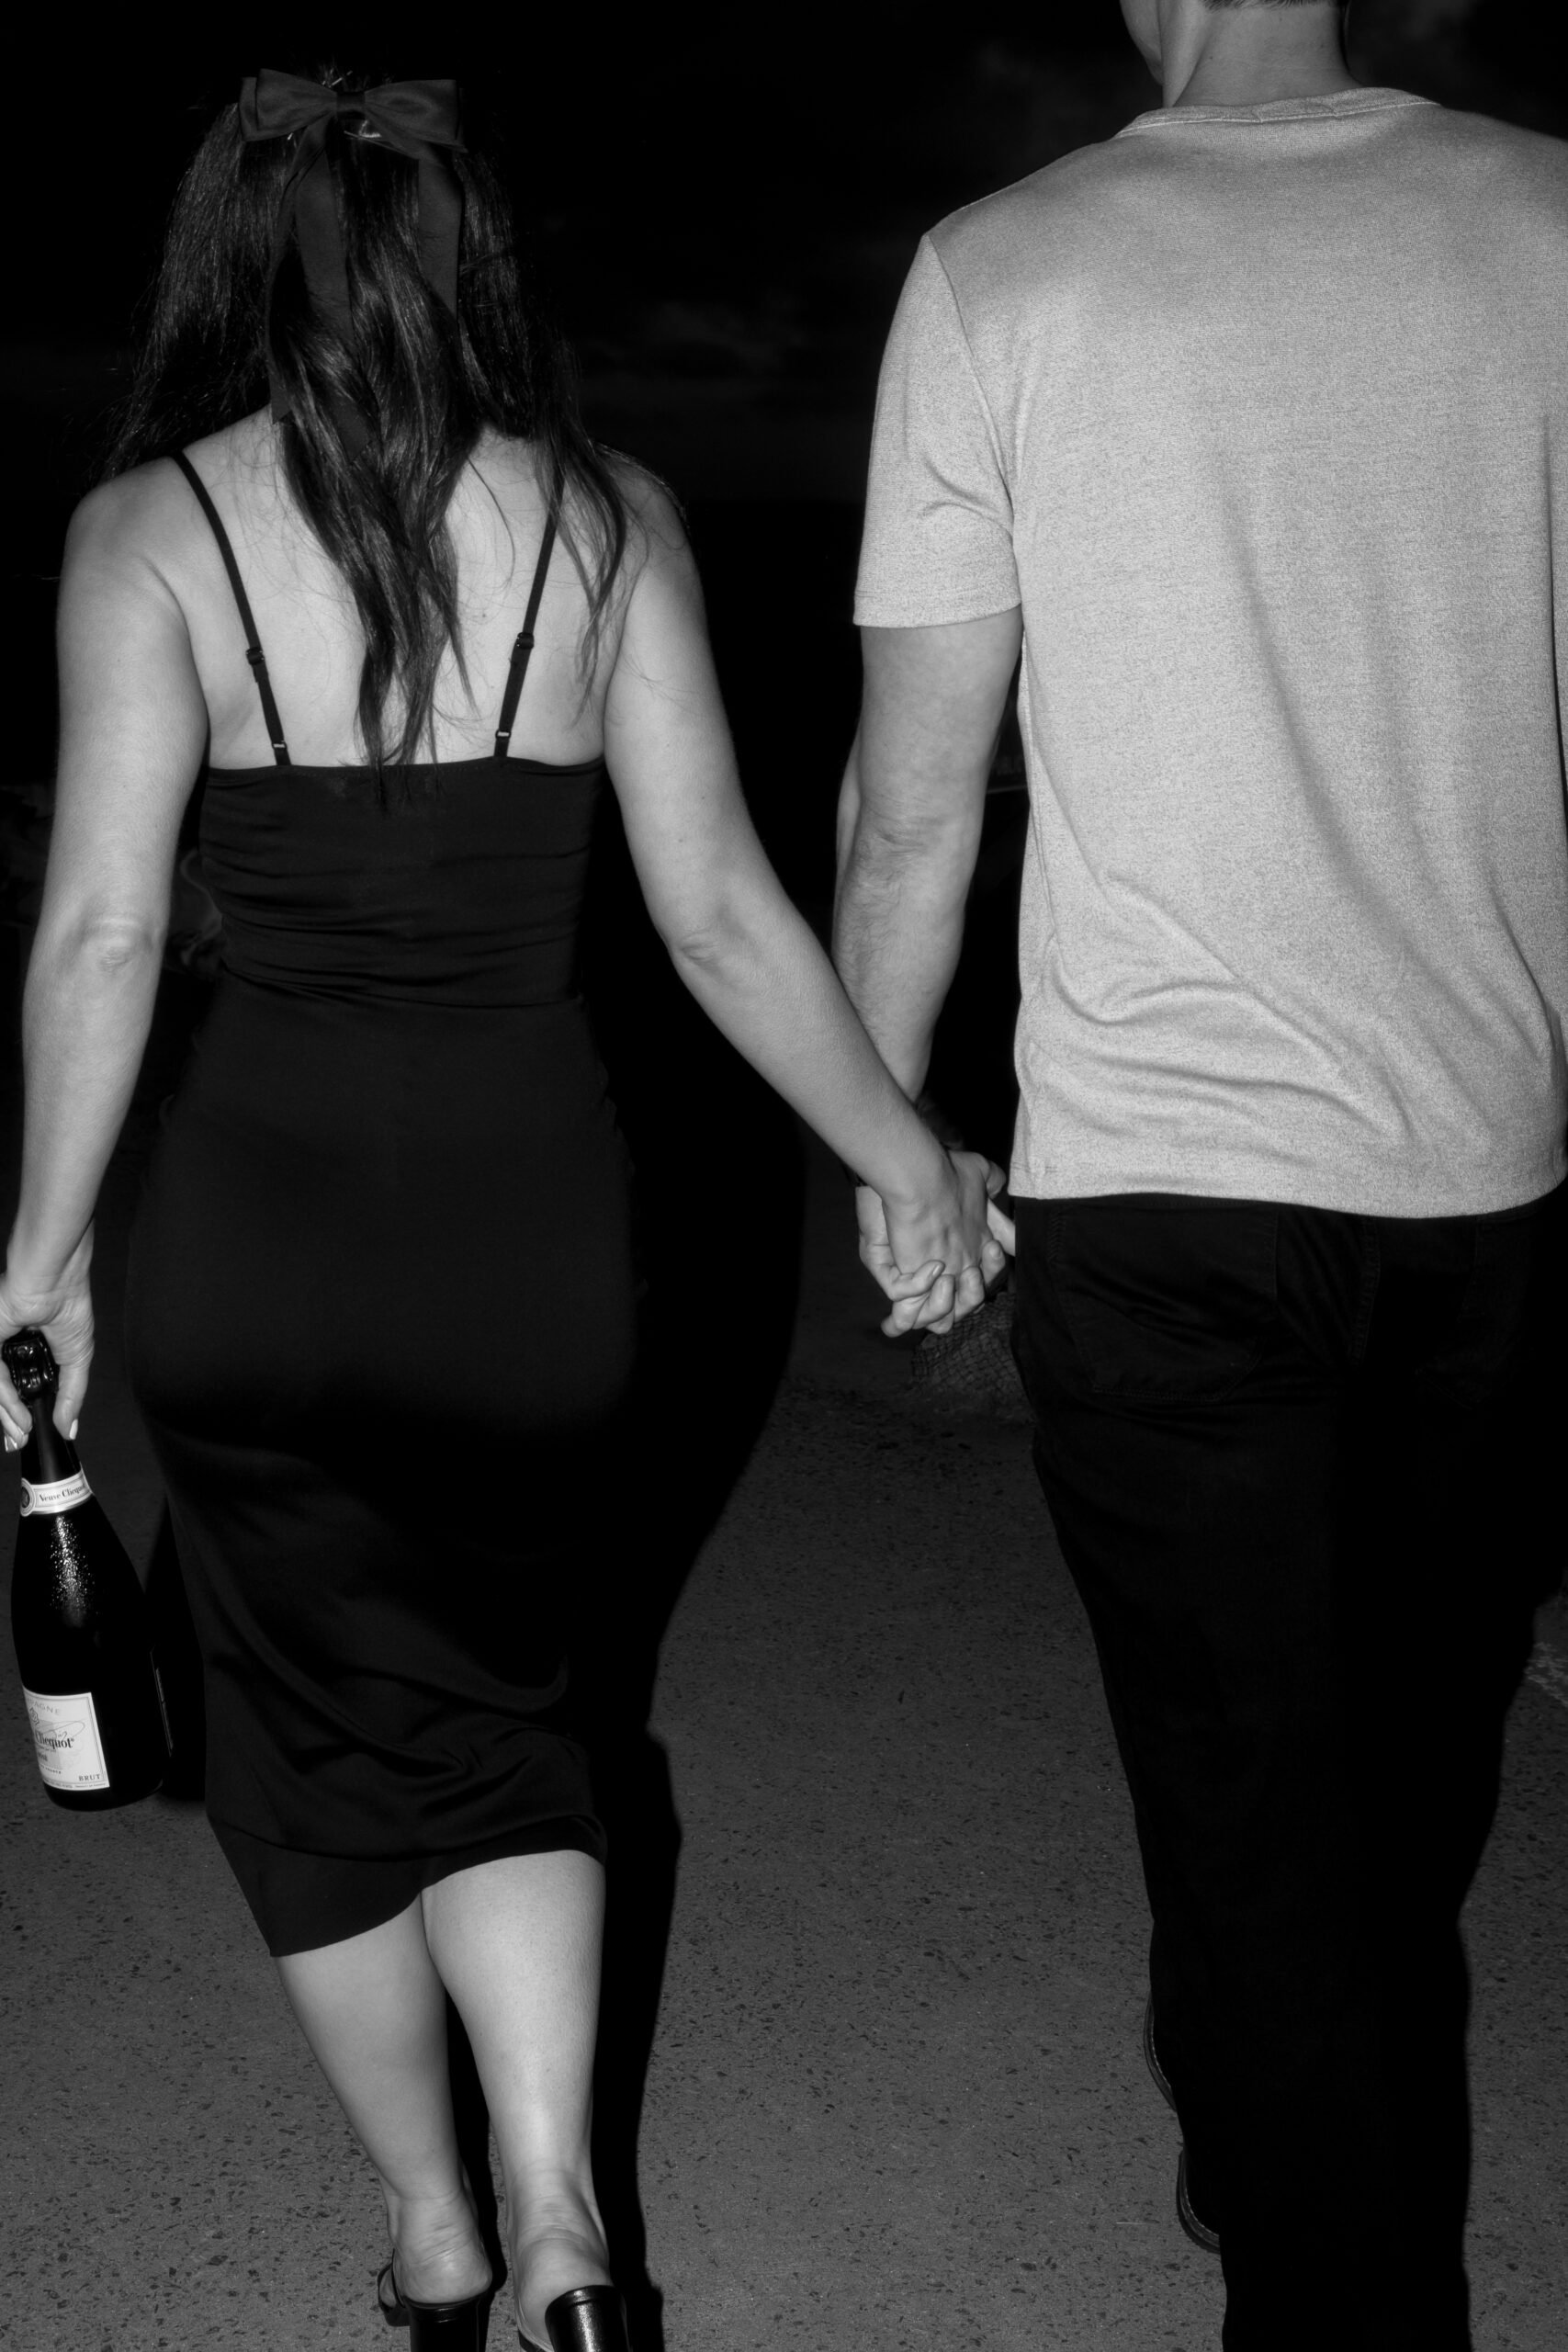 black and white direct flash photo of couple holding hands with a bottle of champagne